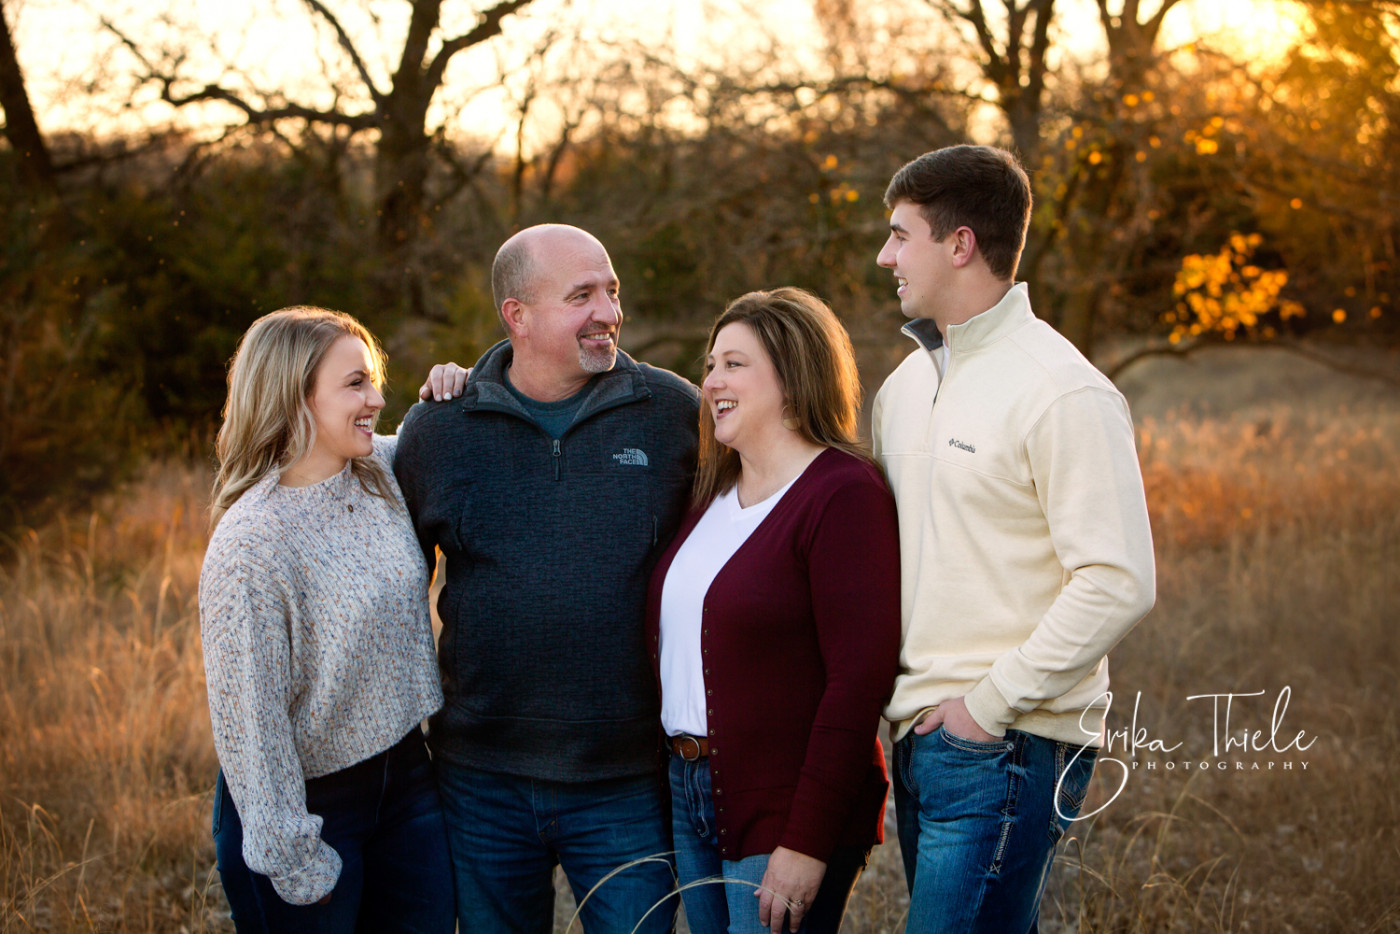 The Bahe Family  |  An Outdoor Family Session 